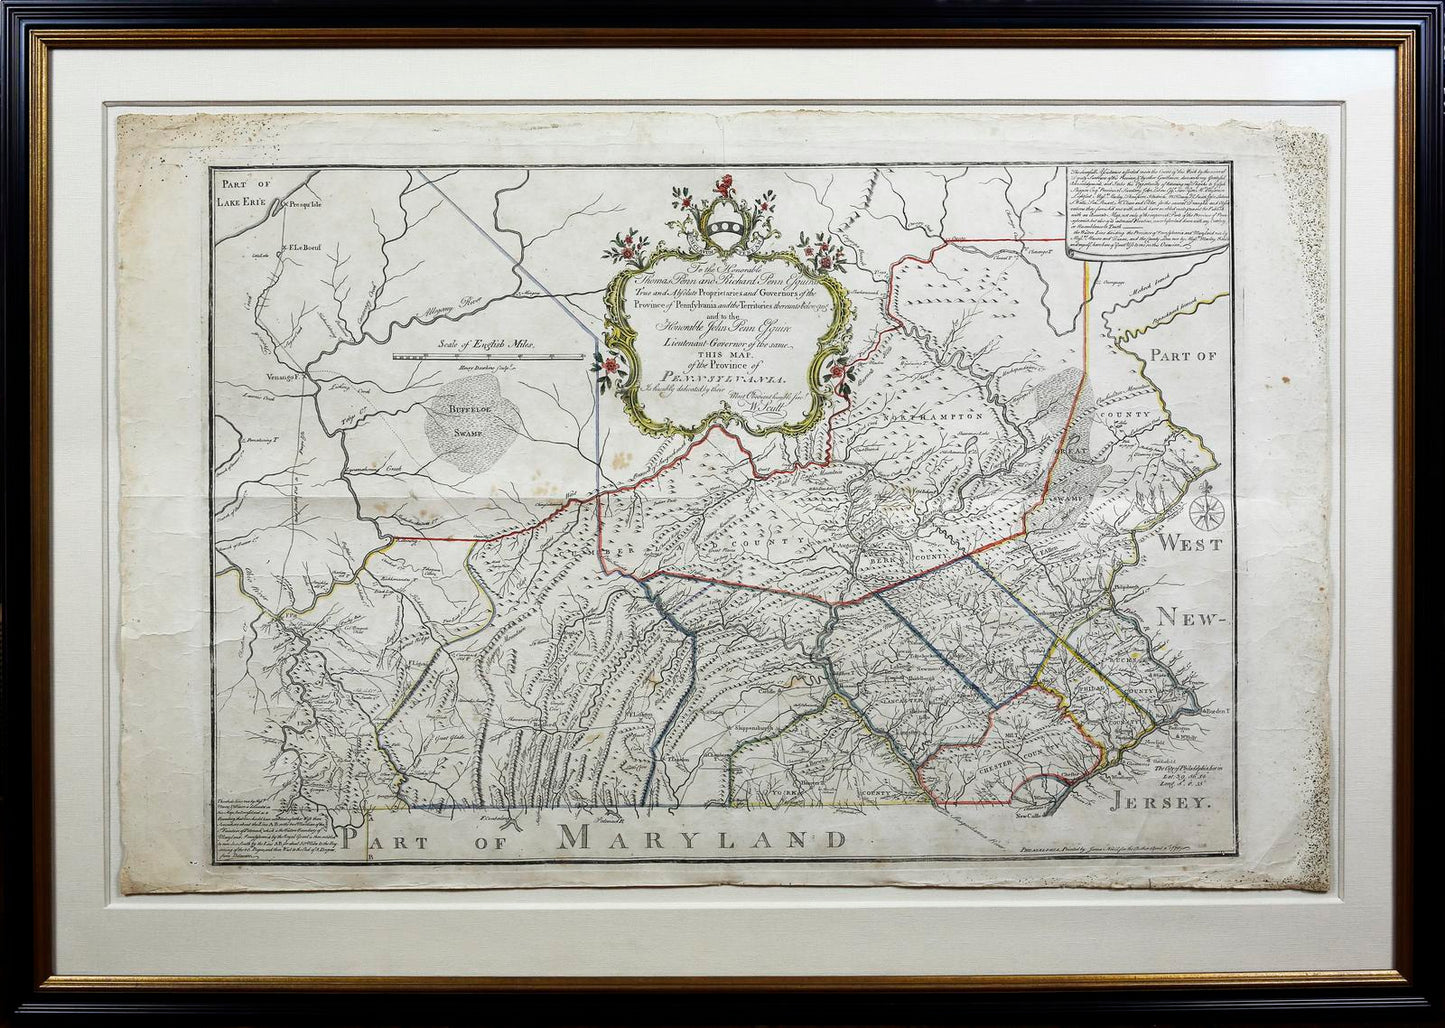 William Scull. Map of the Province of Pennsylvania. 1770.